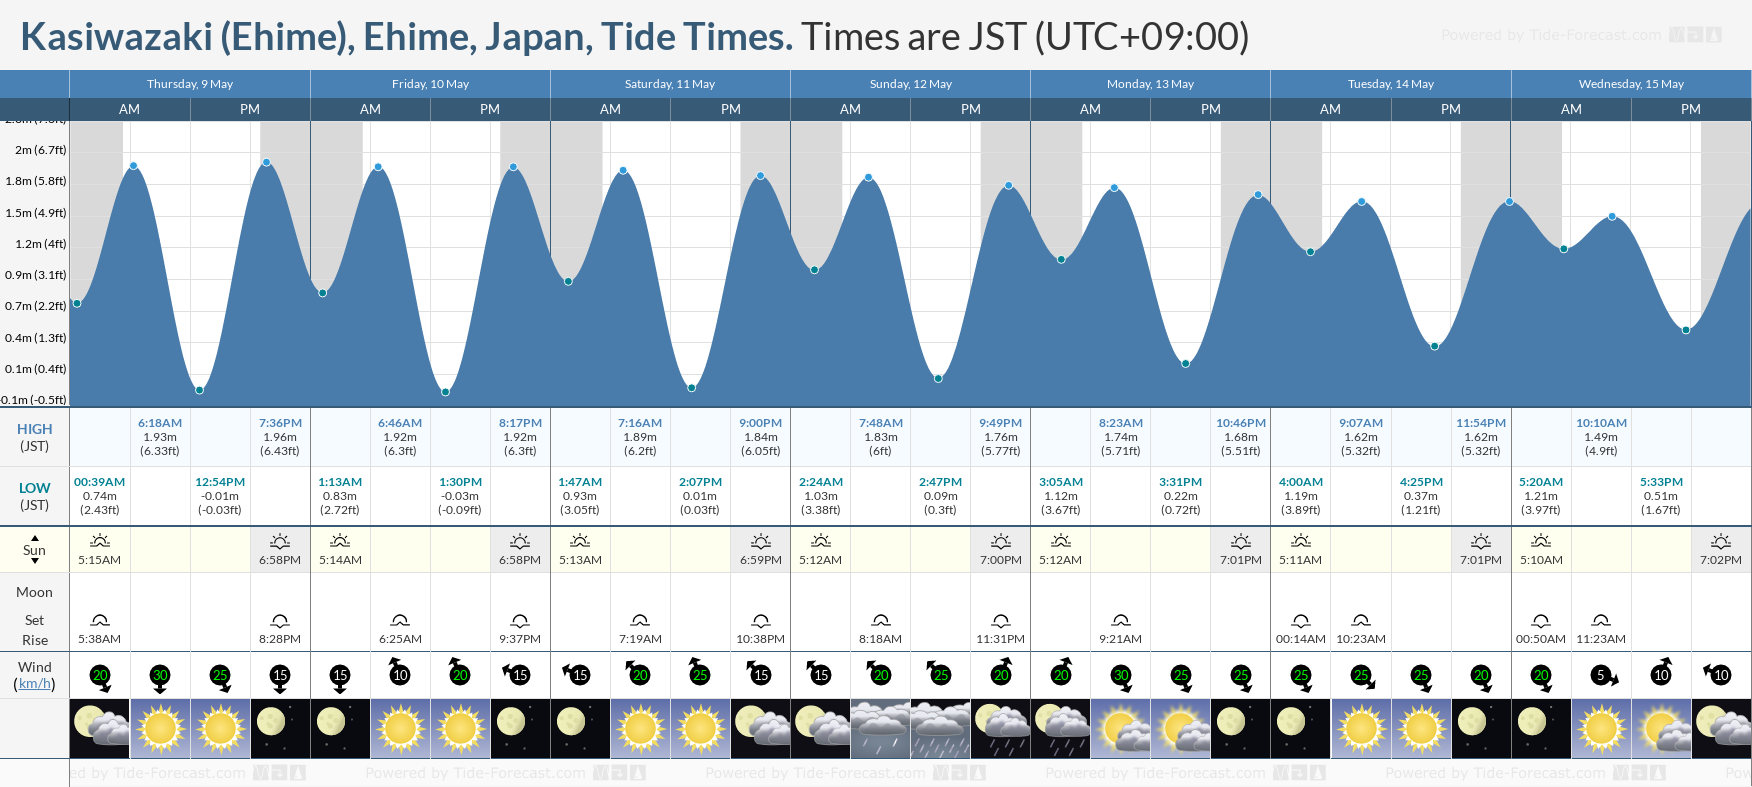 Kasiwazaki (Ehime), Ehime, Japan Tide Chart including high and low tide times for the next 7 days